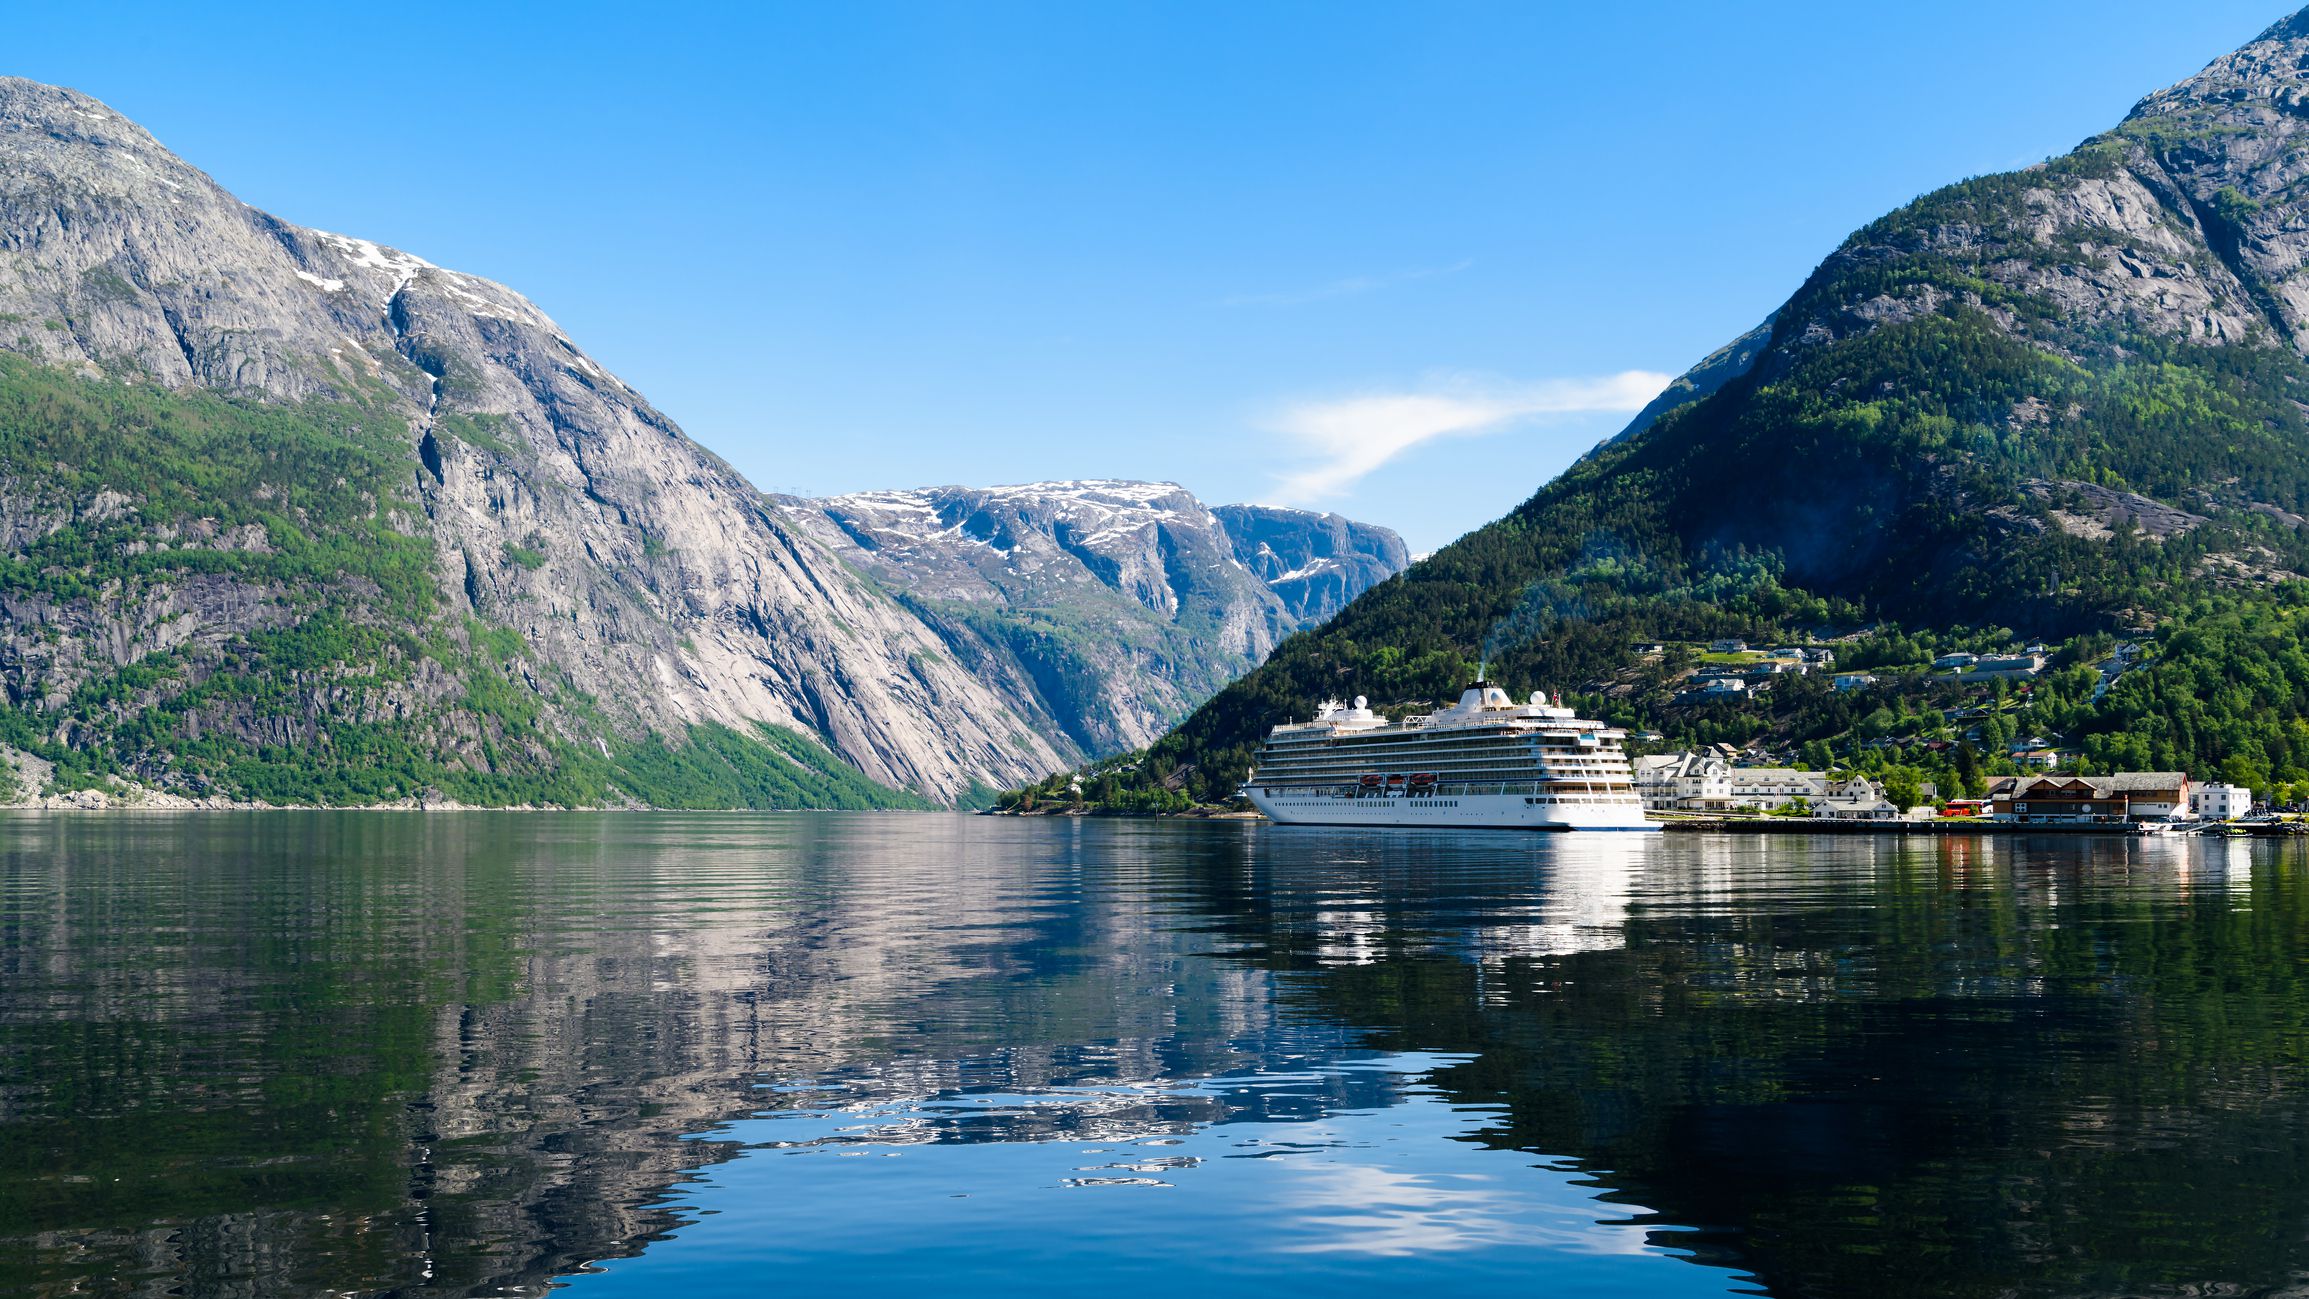 <p>This <a href="https://travel.gocollette.com/en/landing-pages/media_ppc">cruise touring company</a> sails to destinations that include the fjords of Norway, China's Yangtze River, and the Nile River in Egypt. AARP members get a $50 discount per person. </p>